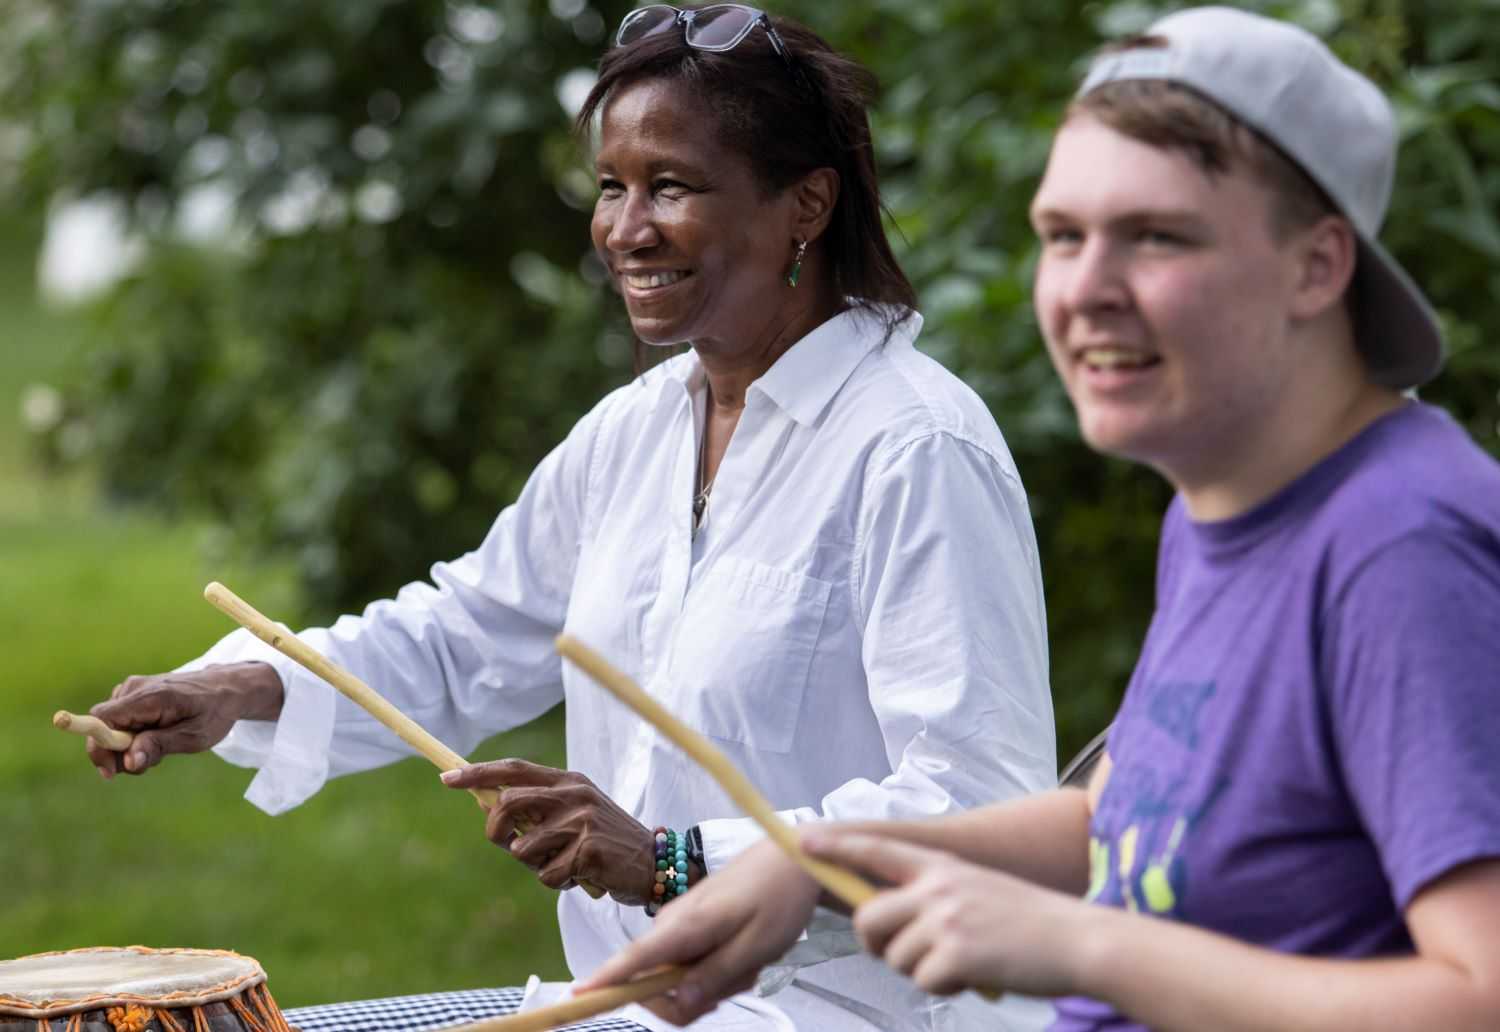 President Laurie Carter joins a percussion session during Mile of Music.